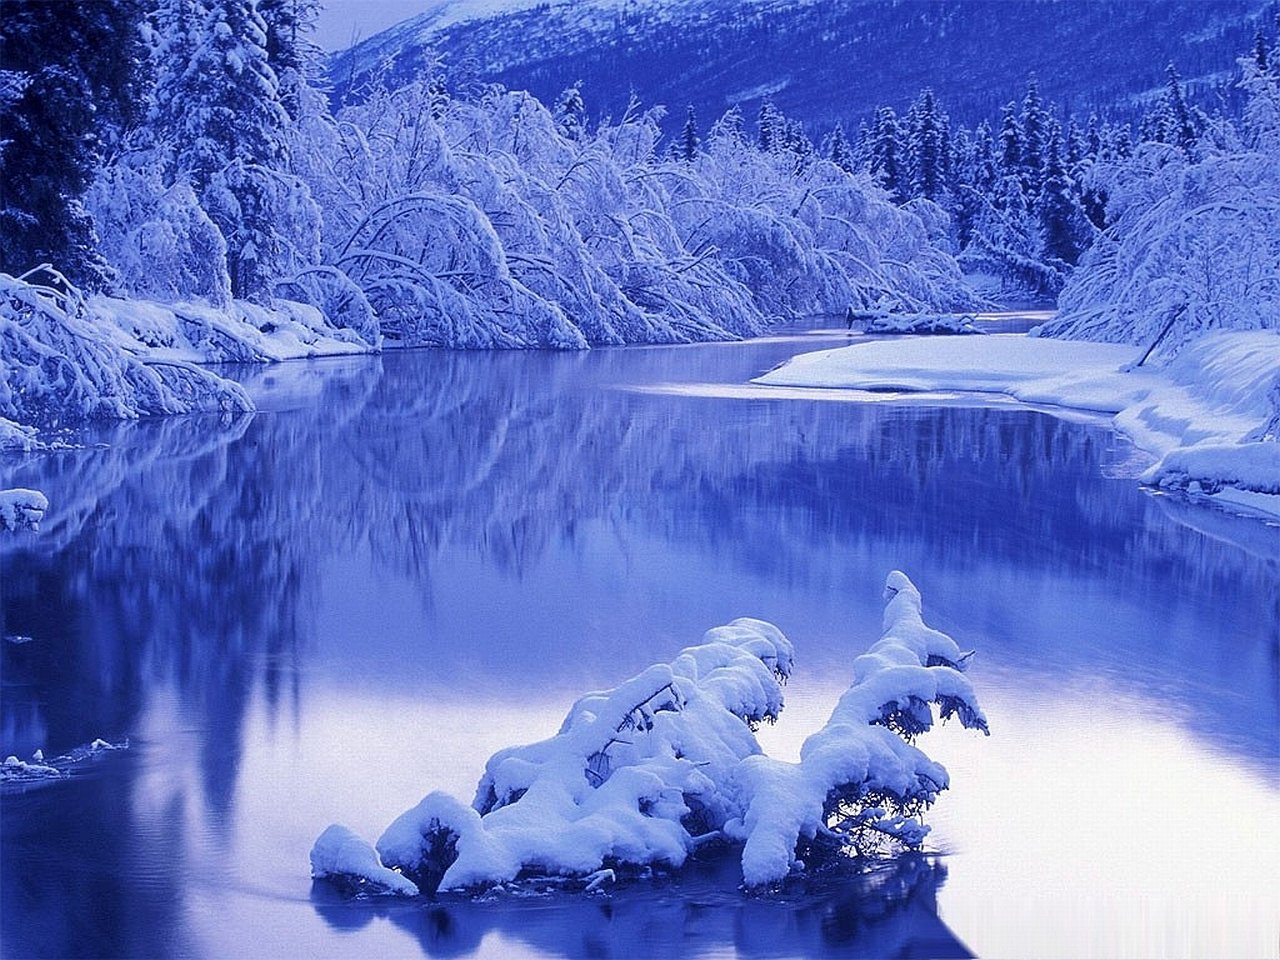 Mirror Lake in Winter Image - ID: 339404 - Image Abyss